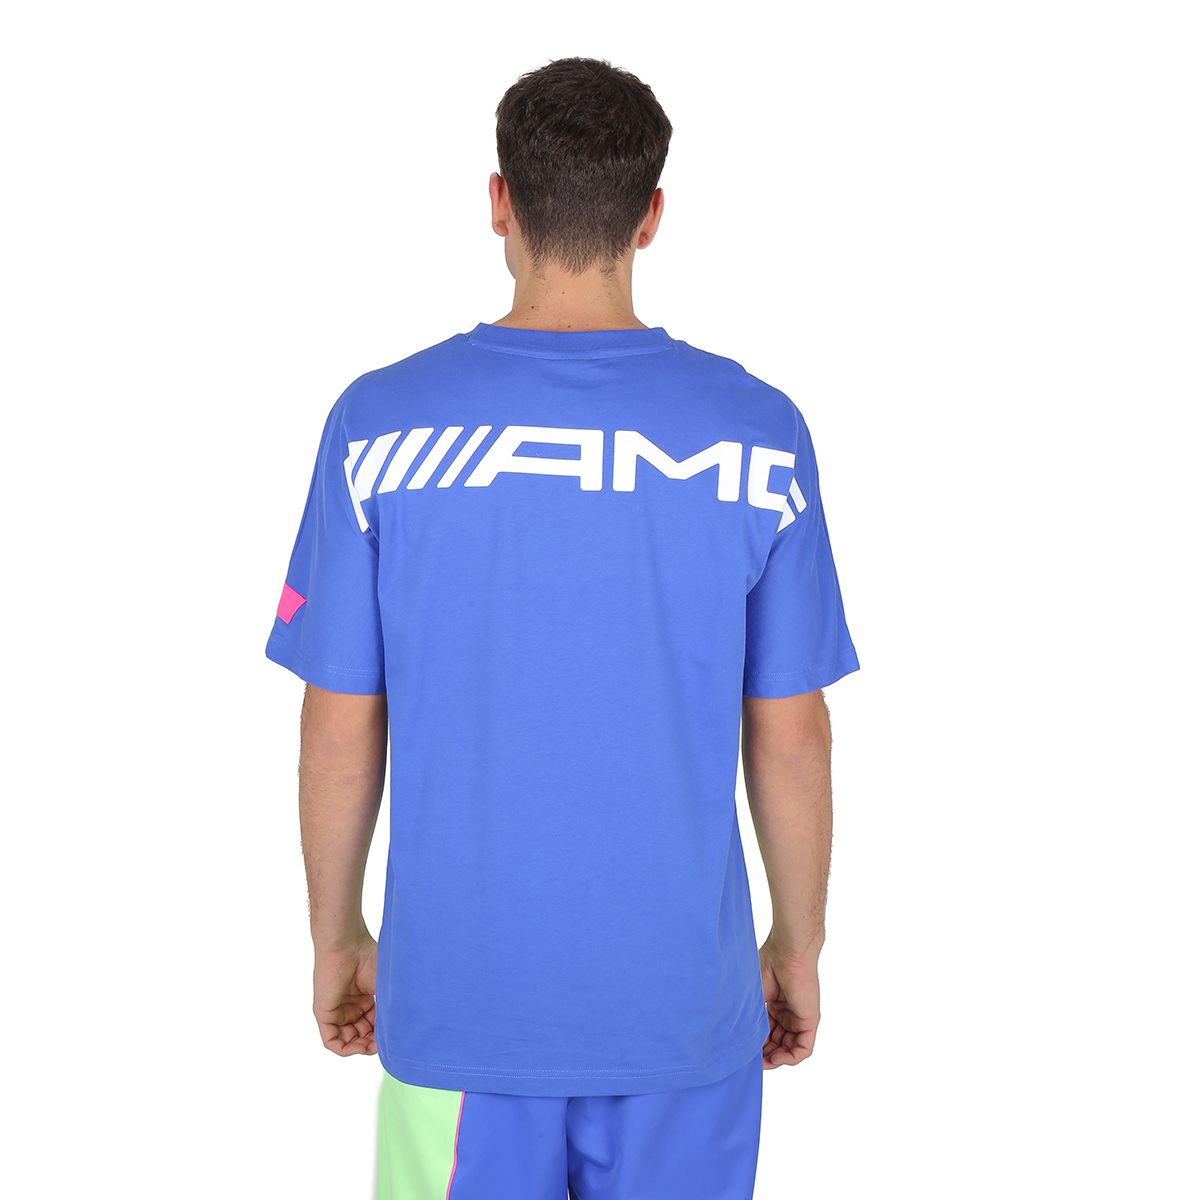 Remera Puma Amg  Hombre,  image number null